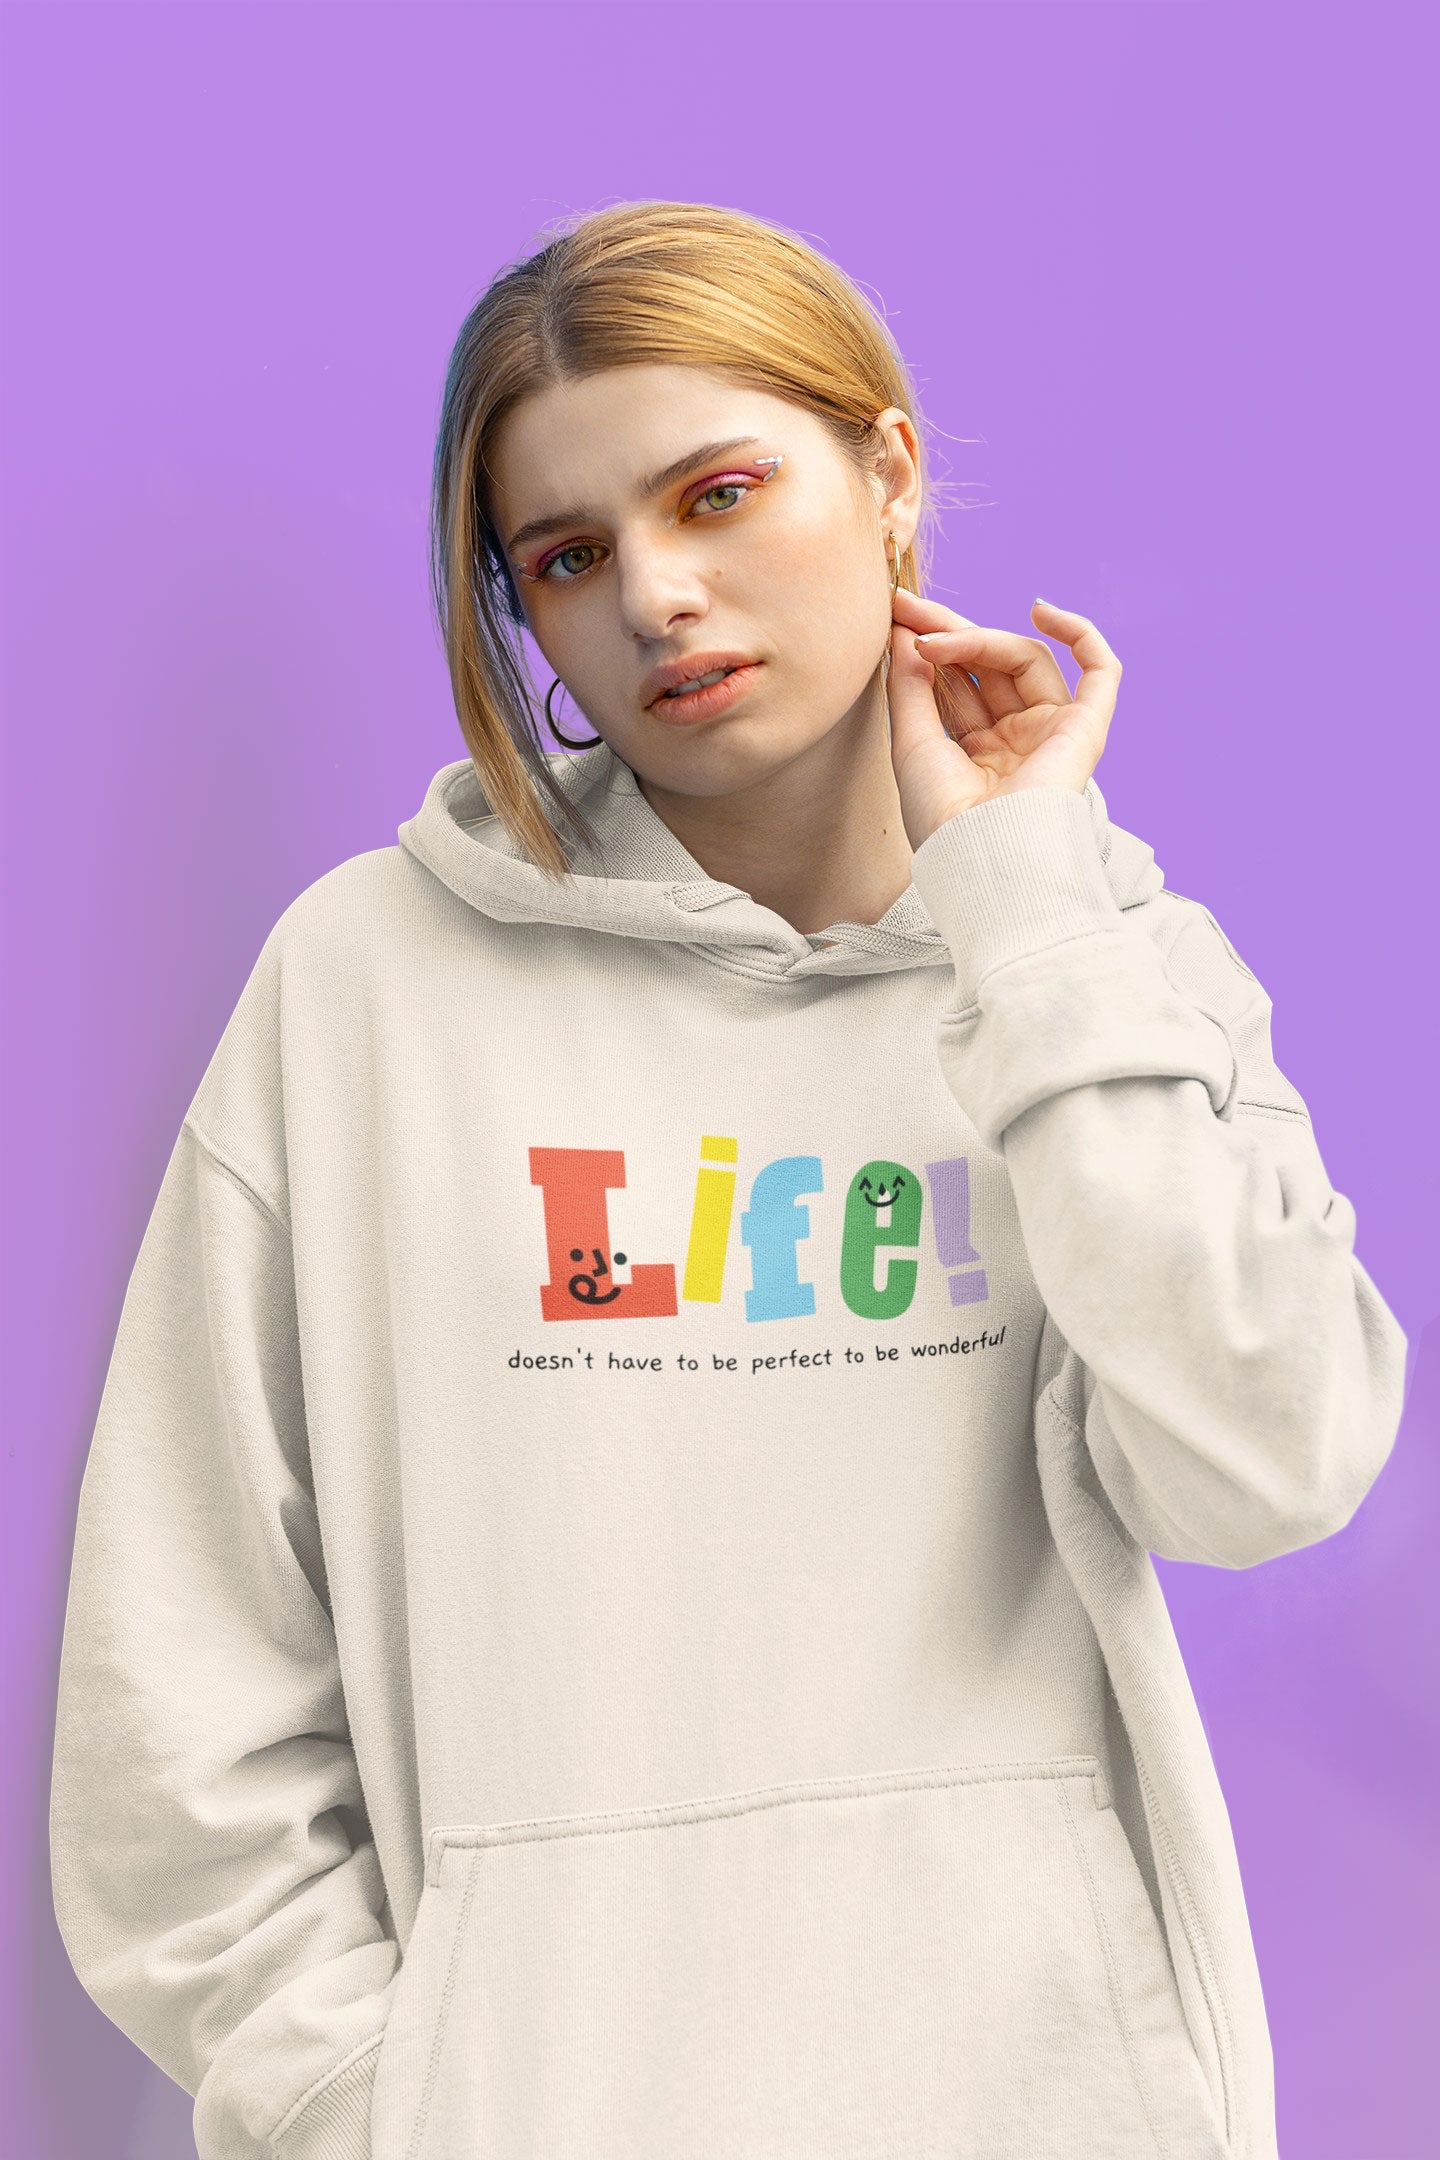 This is The Remix Hoodie LIFE DOESN'T HAVE TO BE PERFECT TO BE WONDERFUL - Unisex Pullover Hoodie